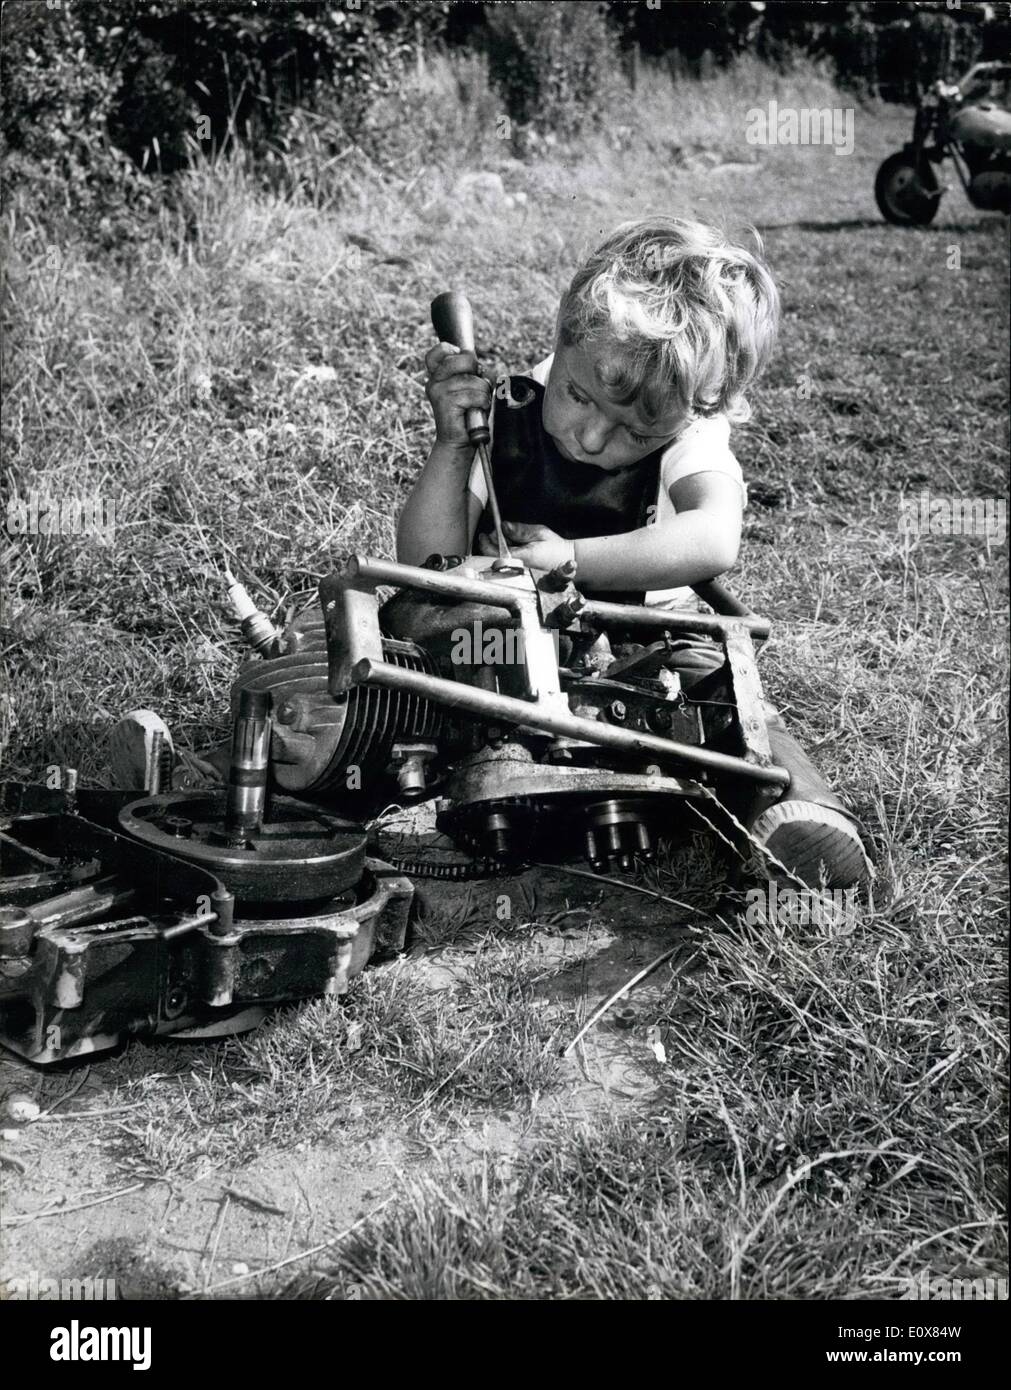 Aug. 08, 1965 - He's speed crazy at five year old: Five year old Keir Doe can often be seen rearing through the garden of his home at 30 mph on a miniature motorcycle made by his father. Keir, who also has a miniature stock car, is no stranger to the racing world. He is often seen by the crowds at Wimbledon Speedway Stadium, Surrey, when he rides his motorcycle or miniature car around the track between races. But for all this Keir, who lives at Bristow Crescent, Camberley, finds that being only five can be a bit of a nuisance Stock Photo